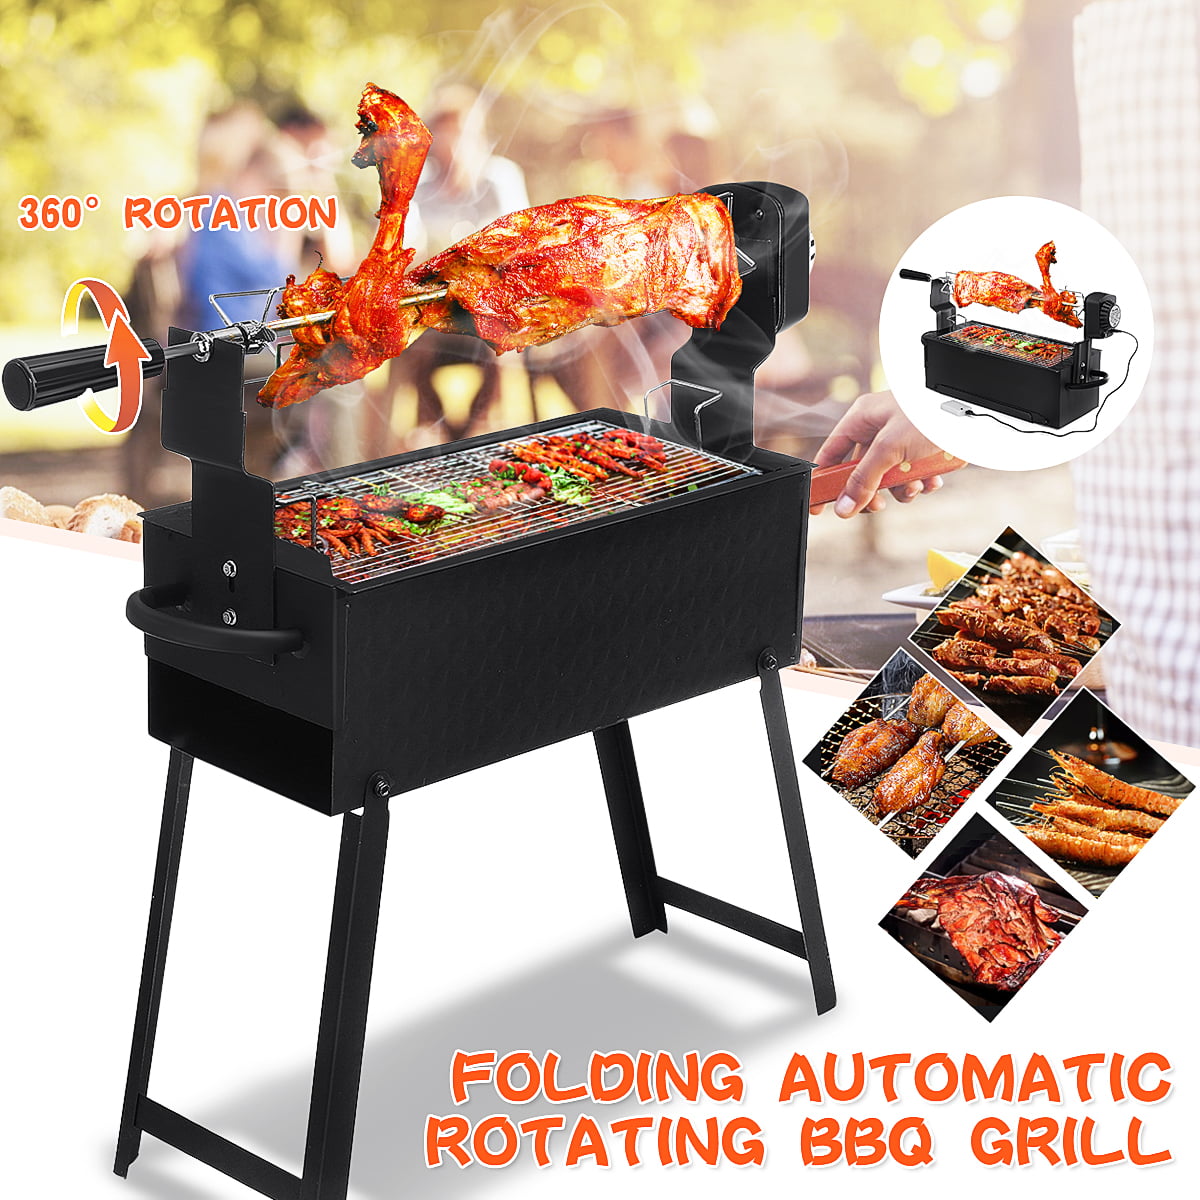 12-Inch Foldable Barbecue Grilling Charcoal Oven with Digital Thermometer. TUSY Ceramic Griller Charcoal Grill Advanced Portable Red